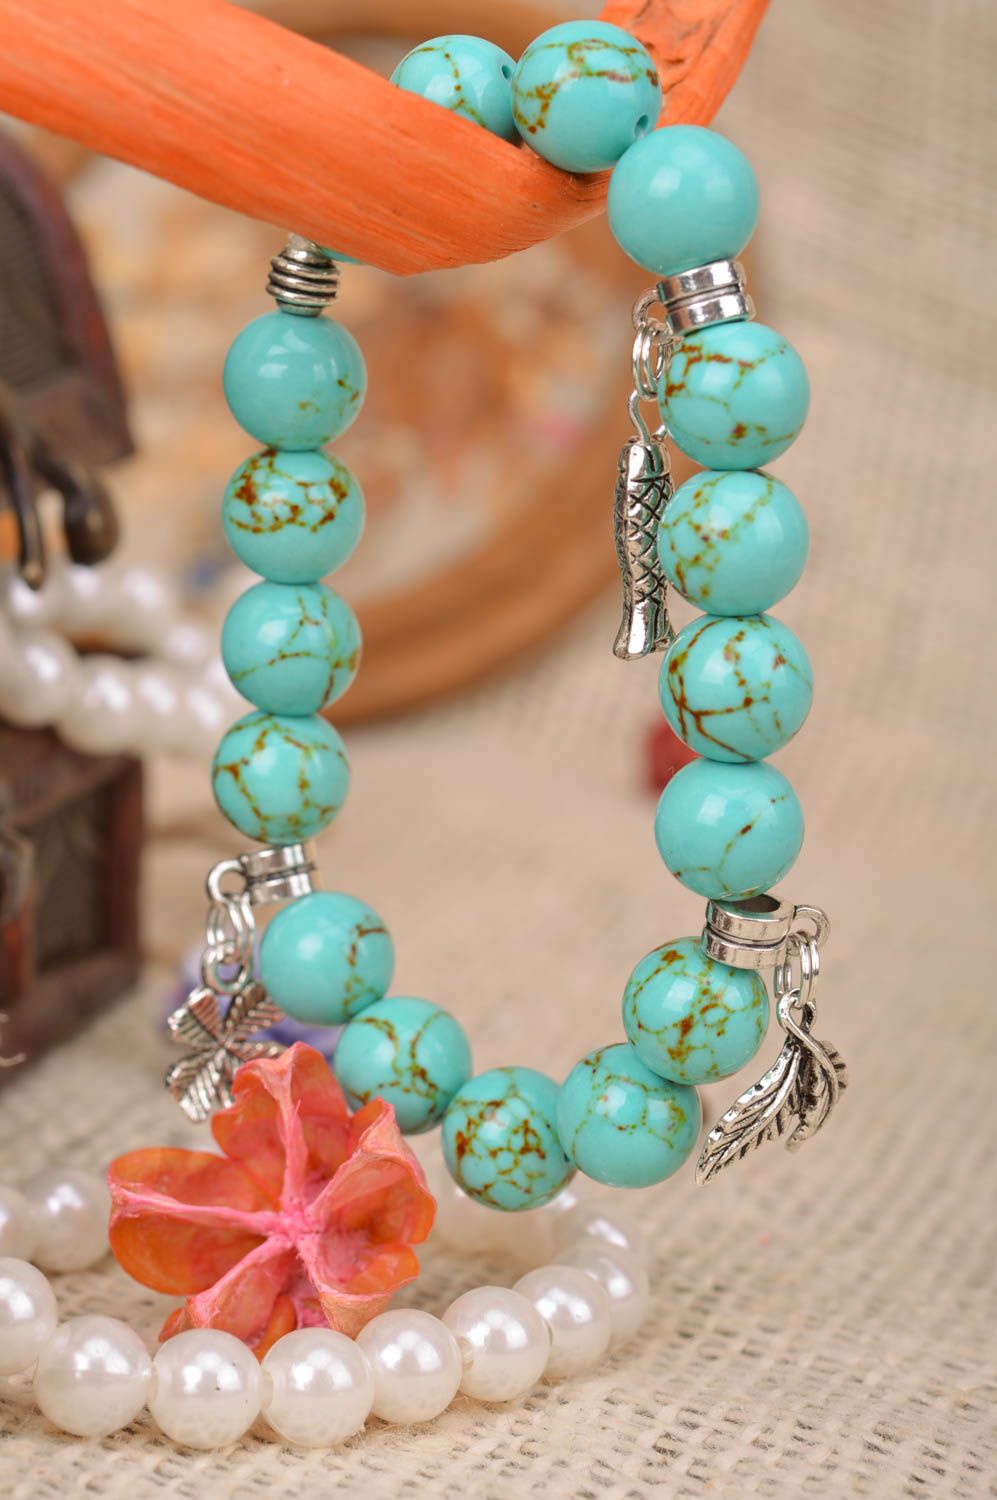 Handmade beaded wrist bracelet styled on turquoise with metal charms fish leaves photo 1